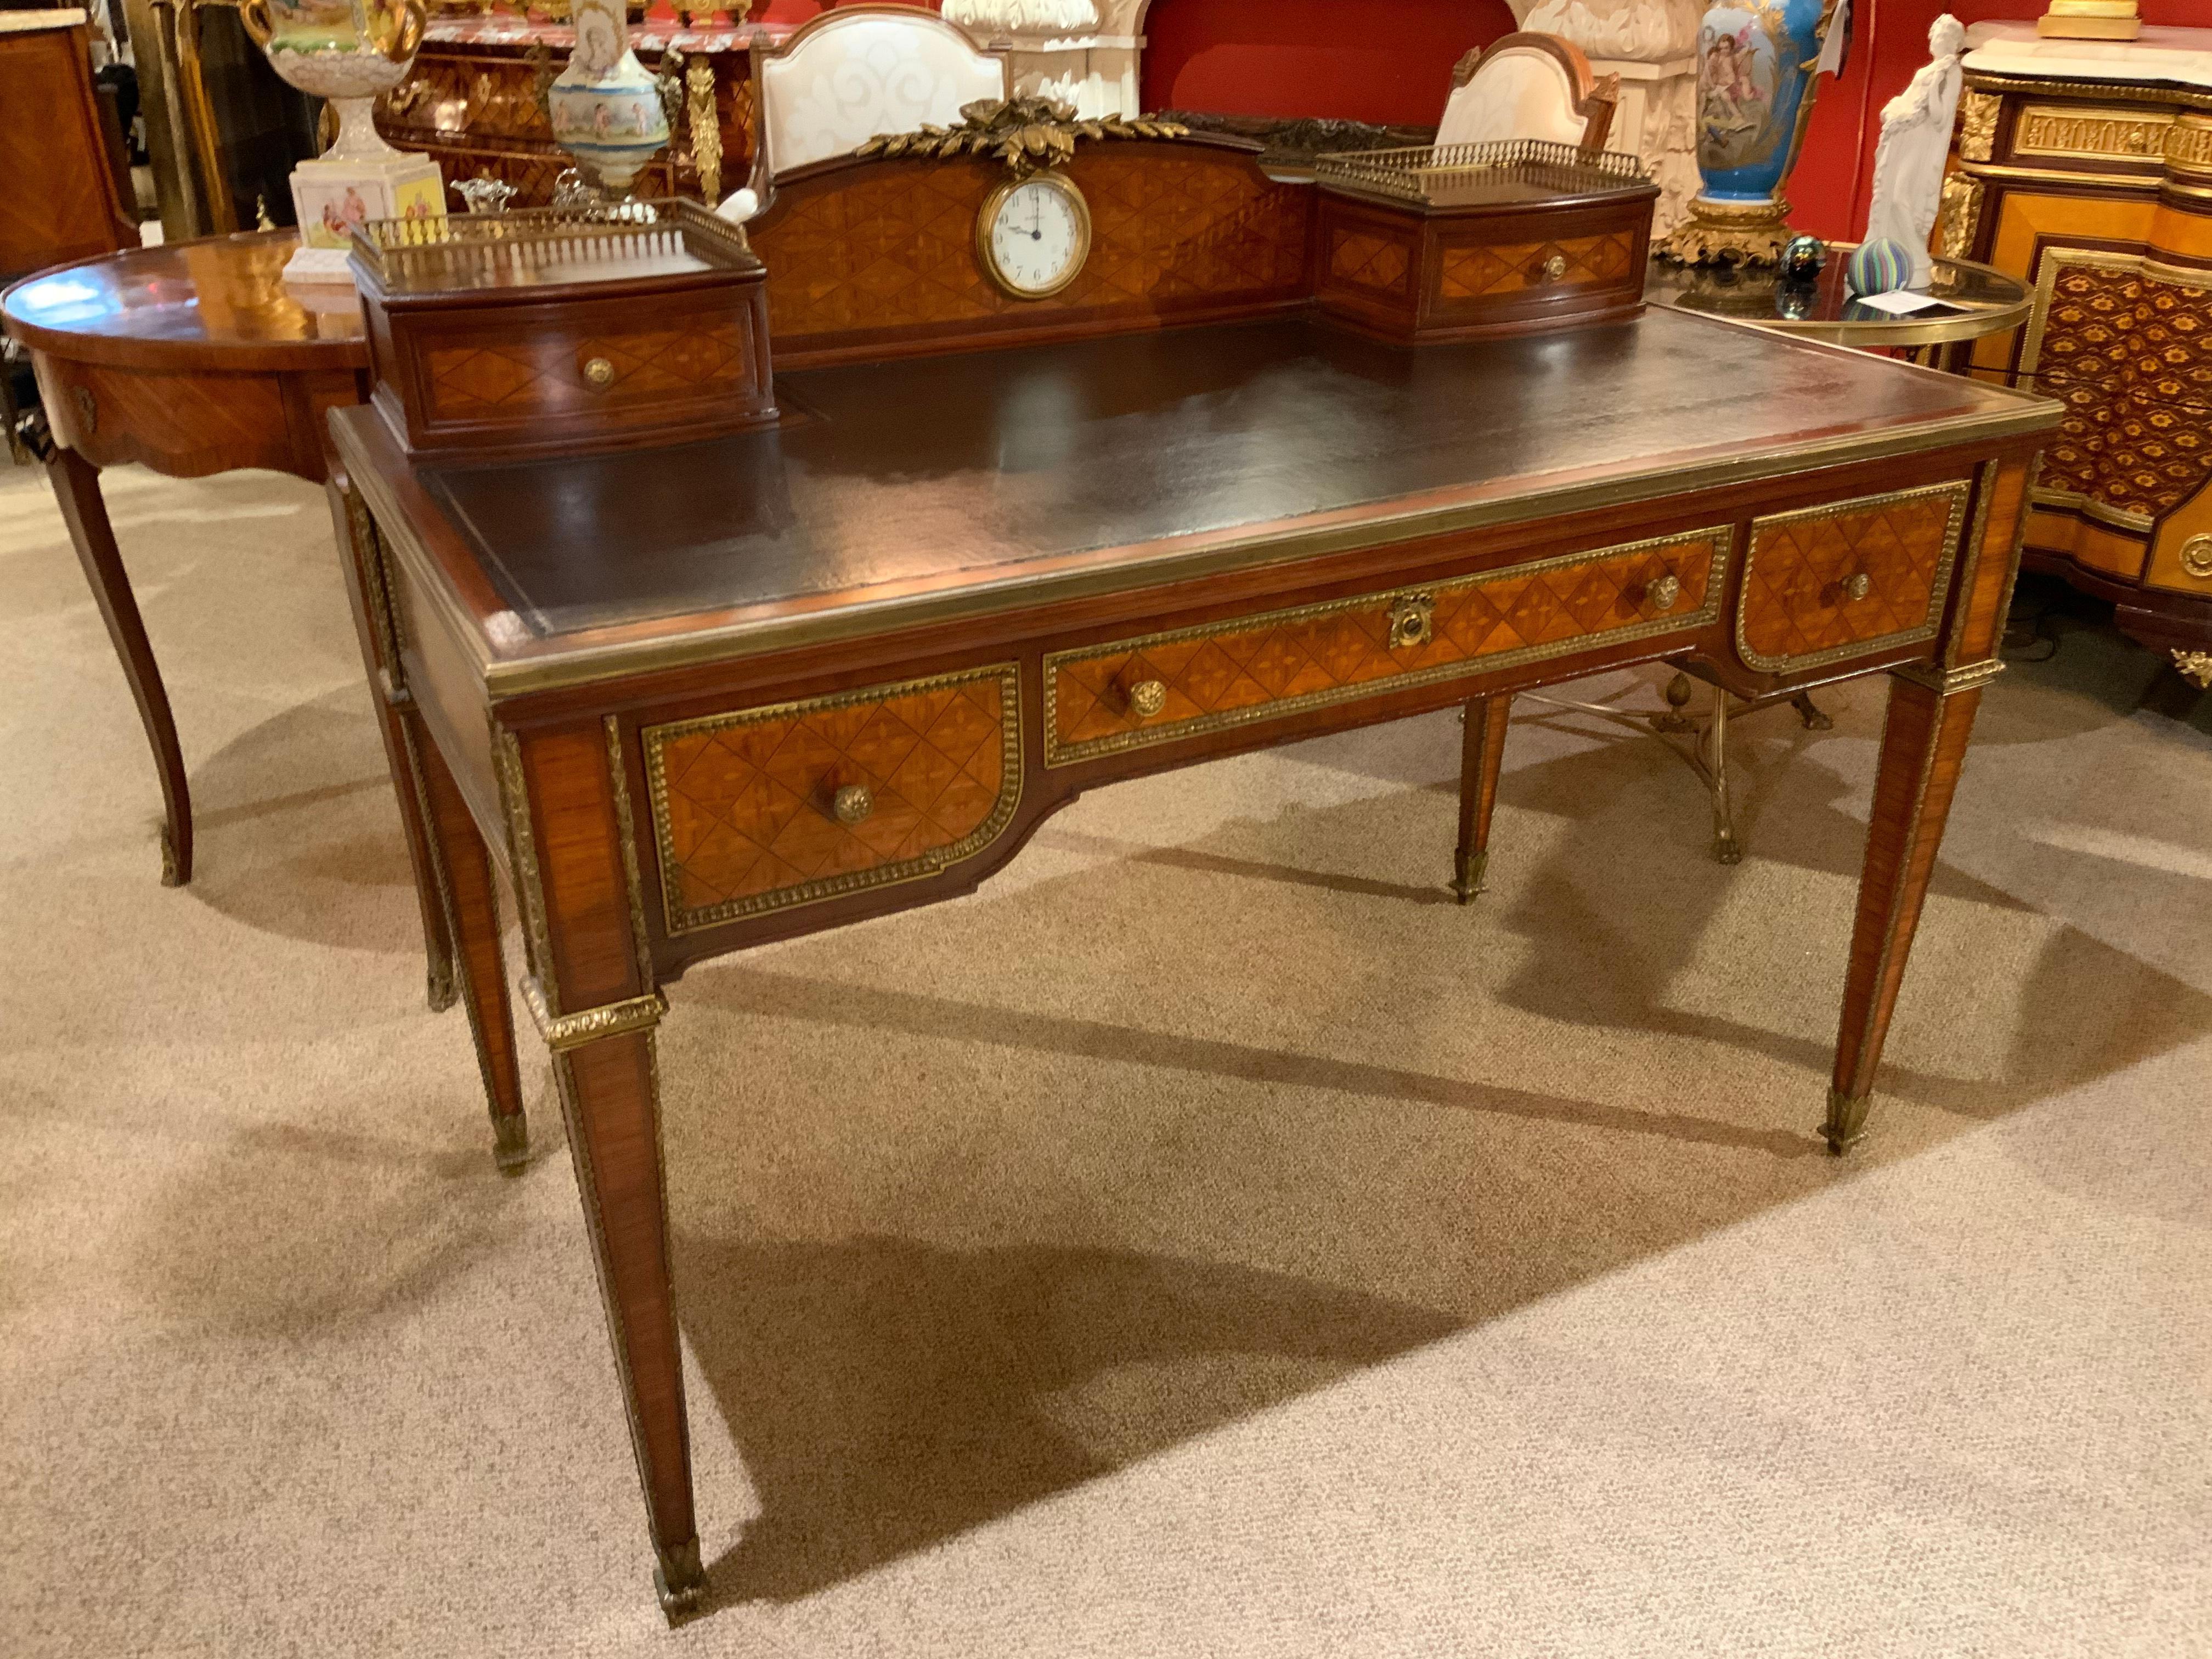 Louis XVI French Parquetry Inlaid Desk with Leather Top and Inset Clock